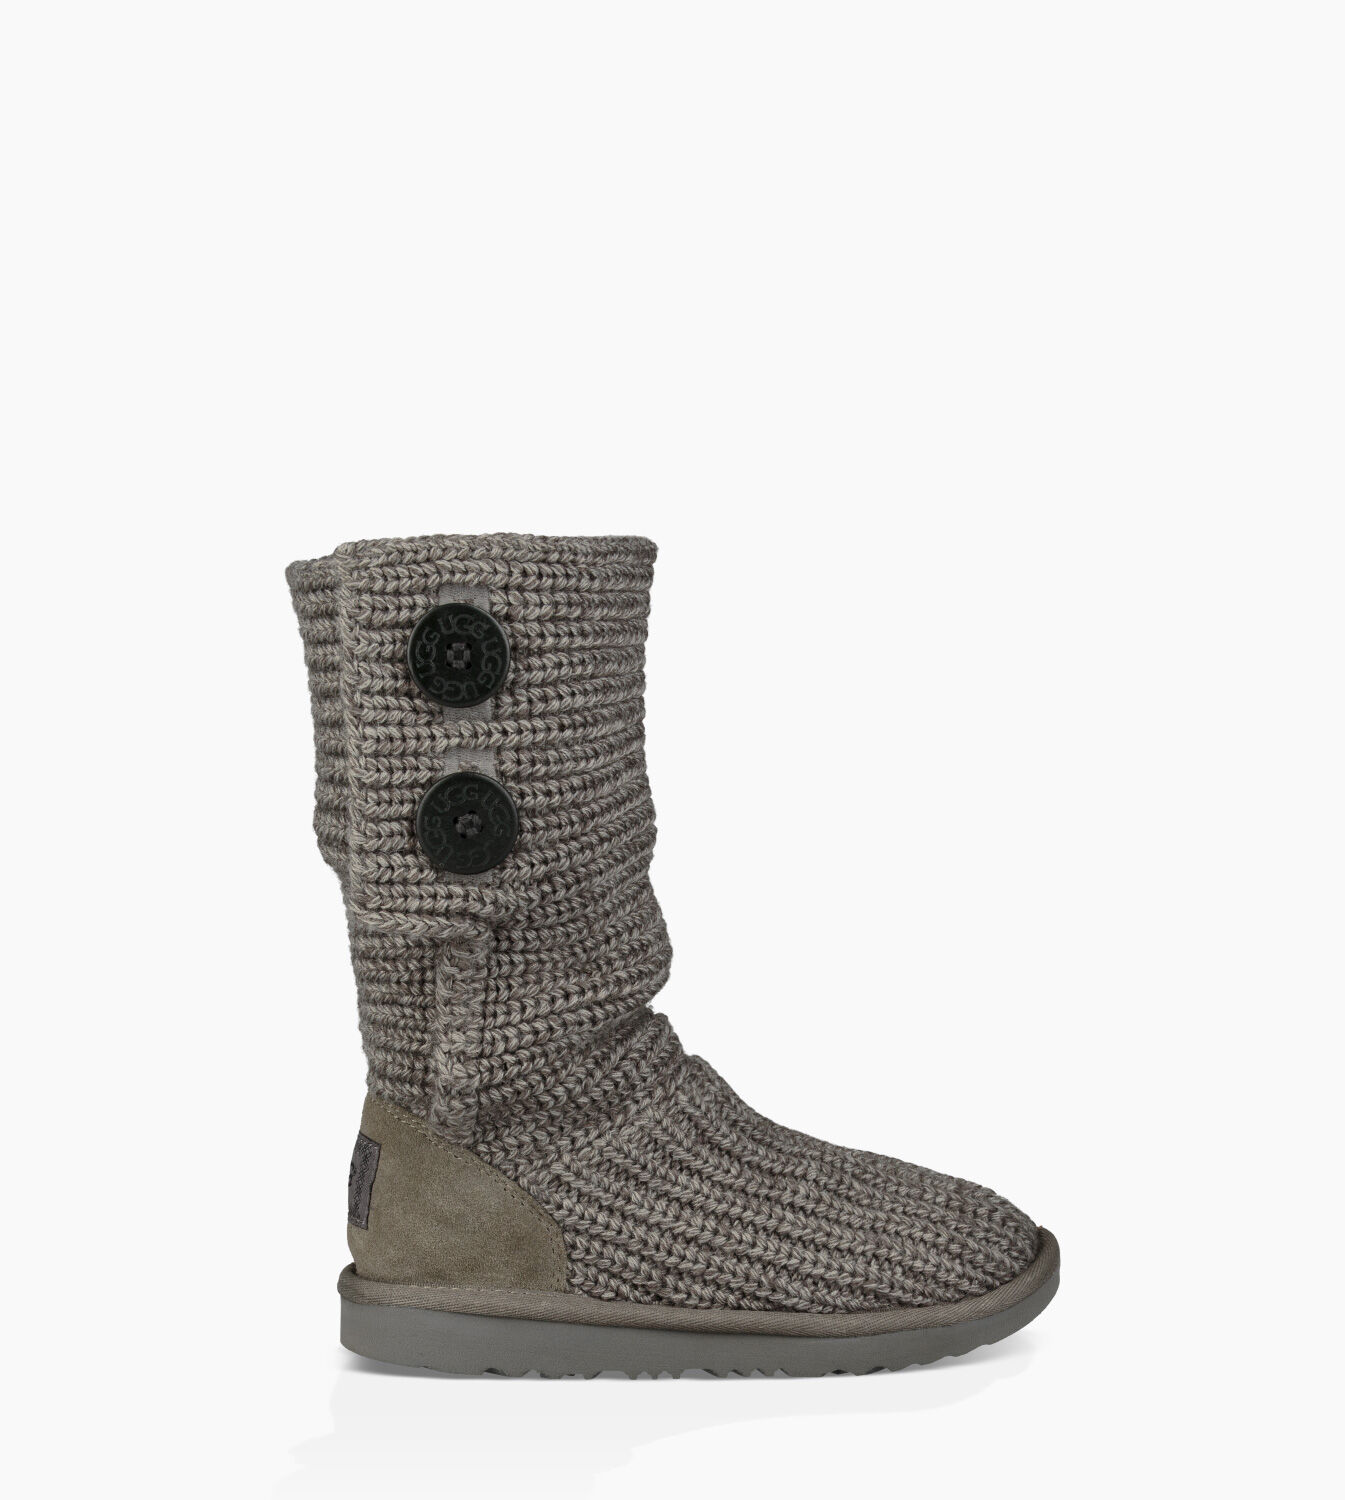 ugg classic cardy sweater boot